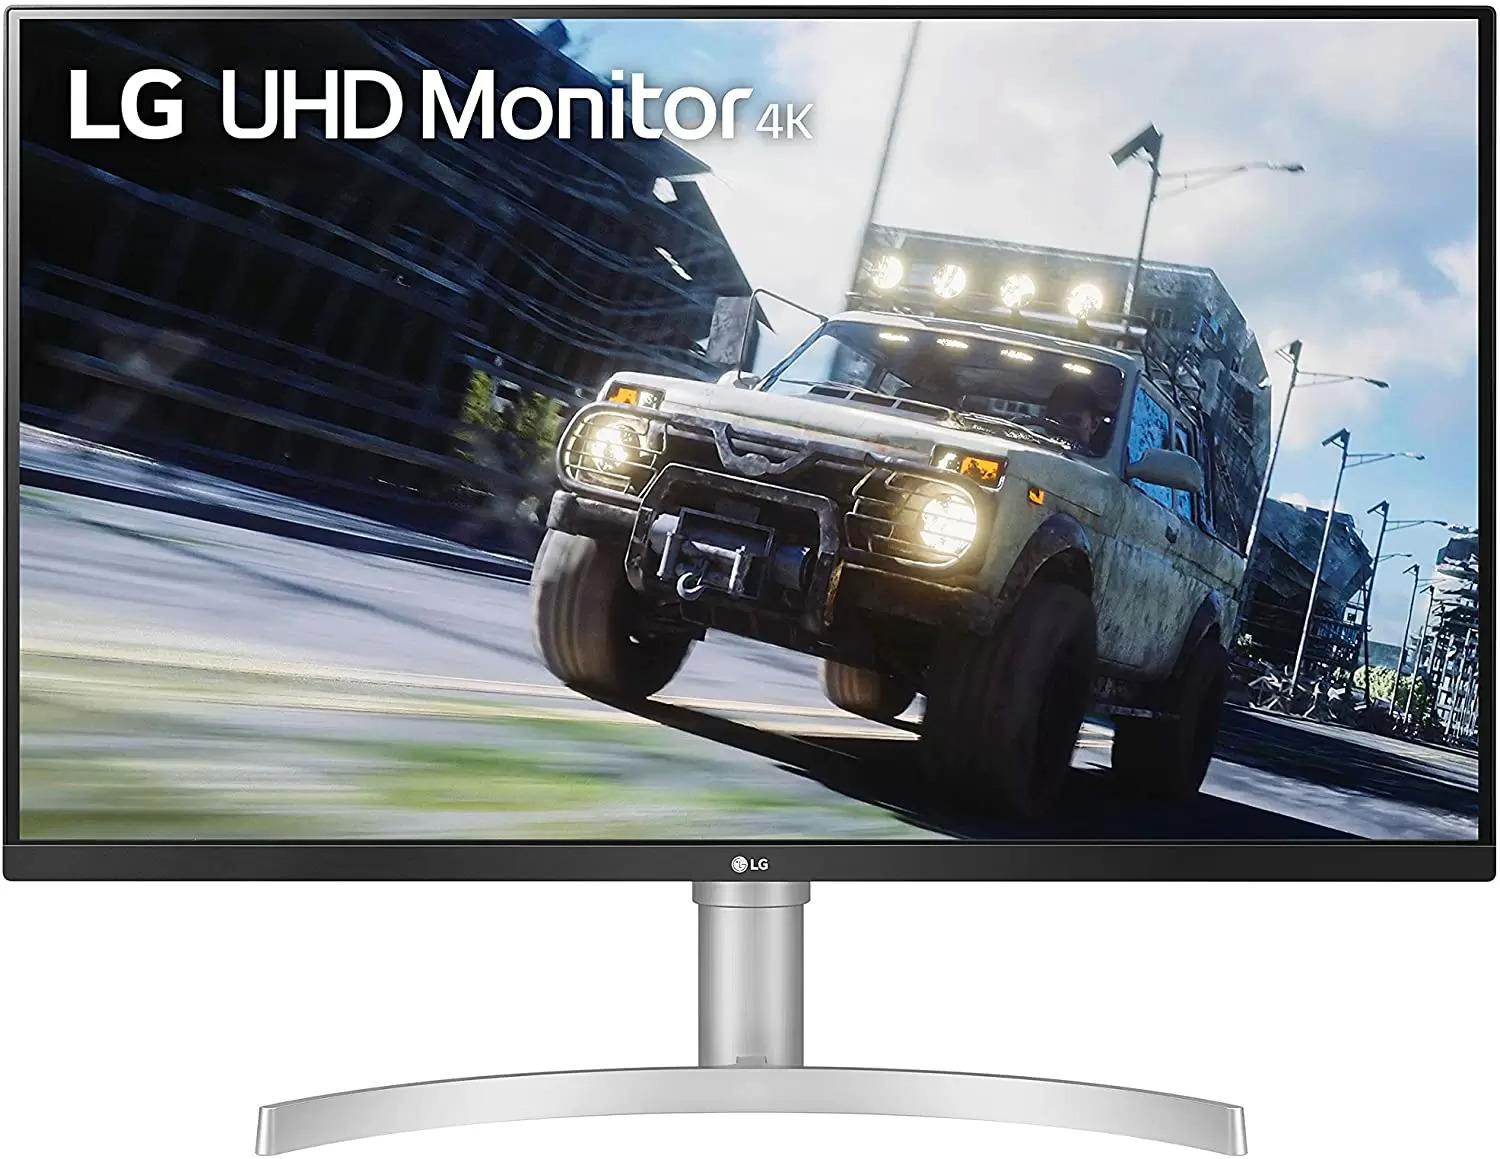 32in LG 32UN550-W UHD HDR 4K Monitor for $169.99 Shipped